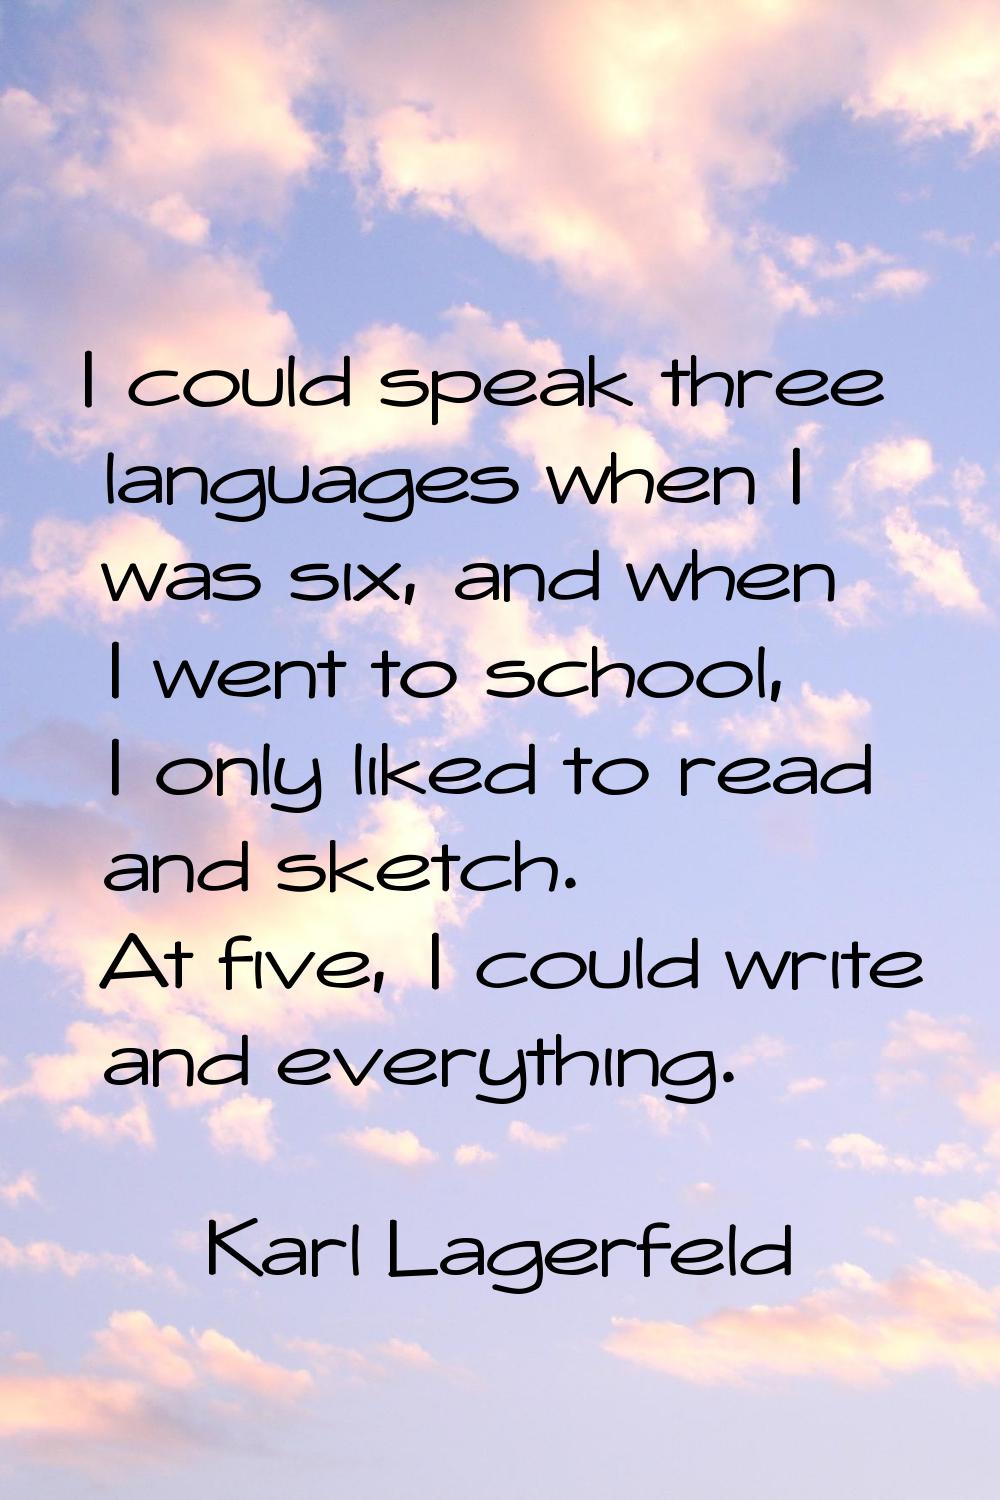 I could speak three languages when I was six, and when I went to school, I only liked to read and s